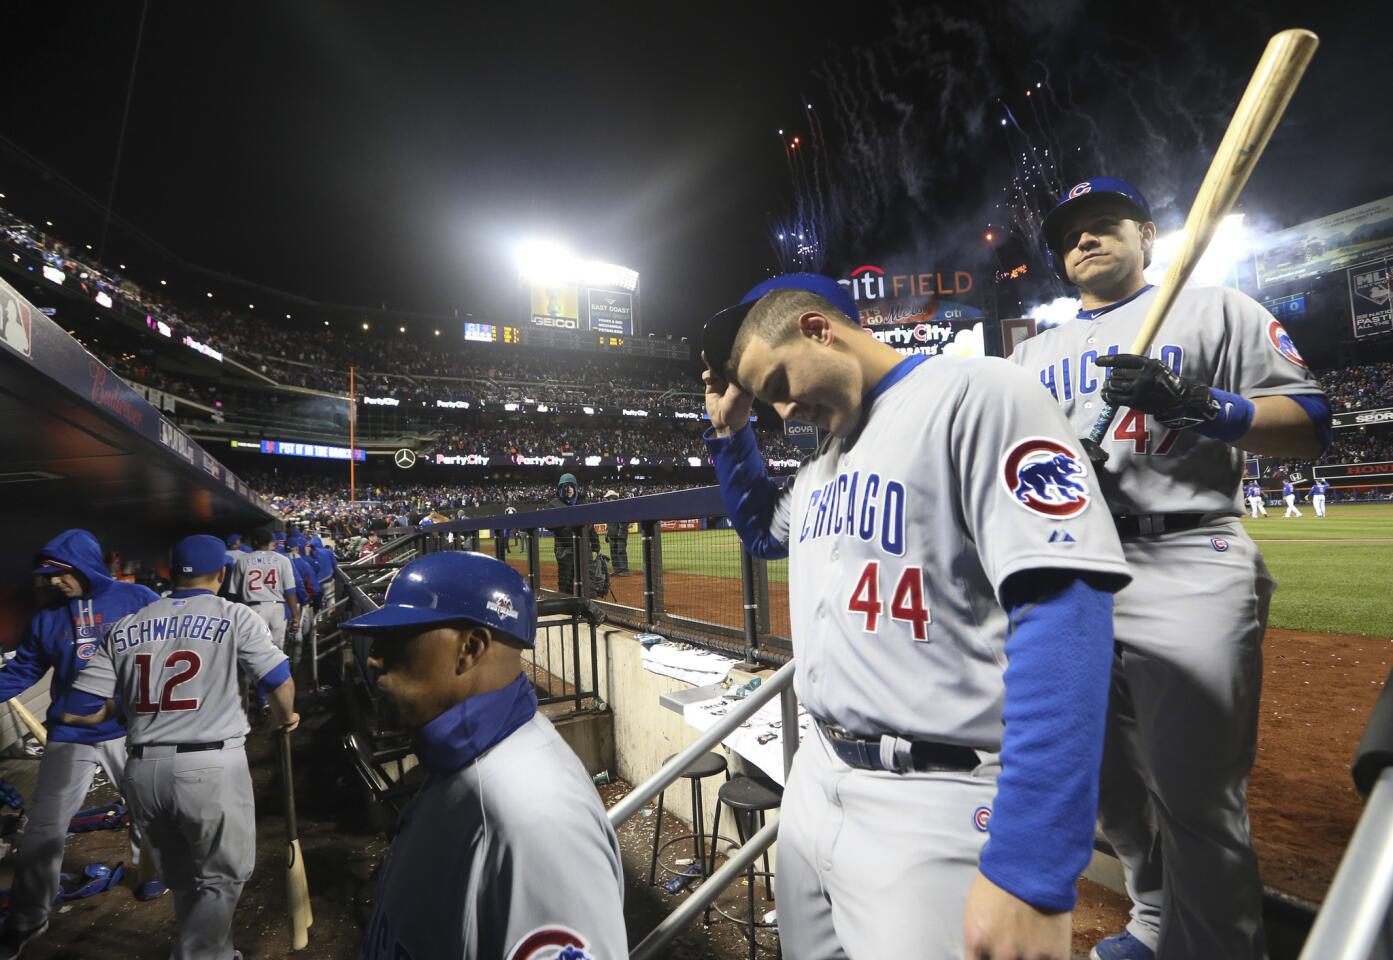 Anthony Rizzo and Miguel Montero on their way to the locker room,after their team's 4-1 loss.